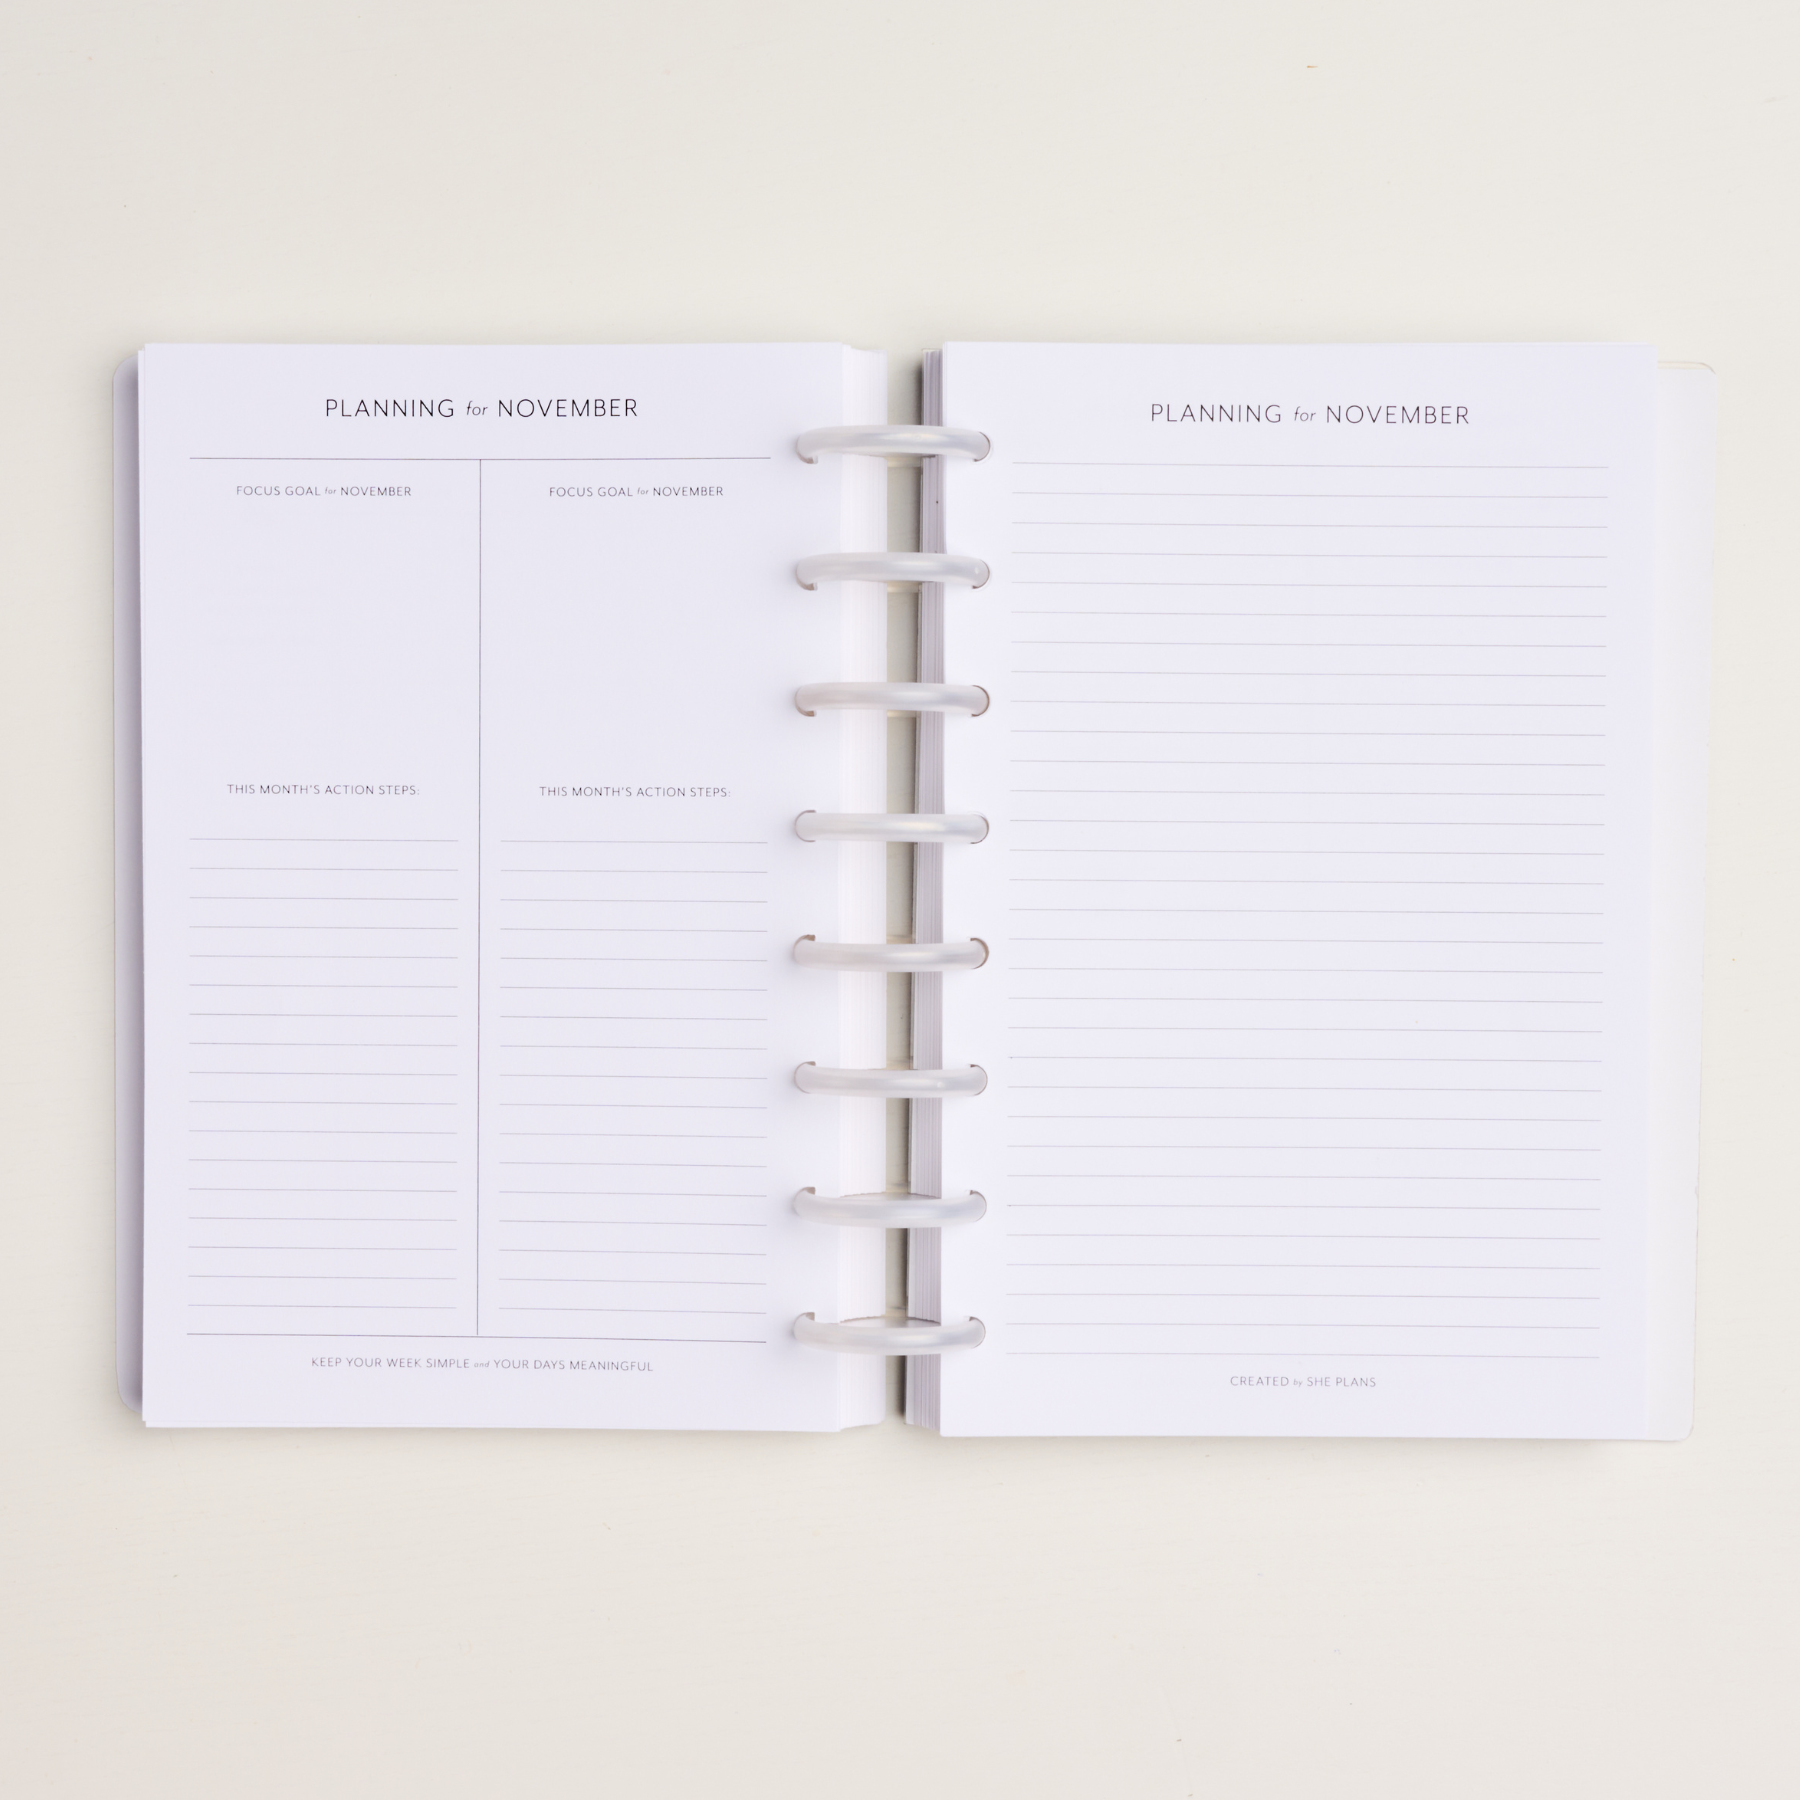 2024 Planner Refills - One Page Per Day Daily ＆ Monthly Planner, January  2024 -December 2024, Prioritized, To-Do List, Notes, Appointment Schedule